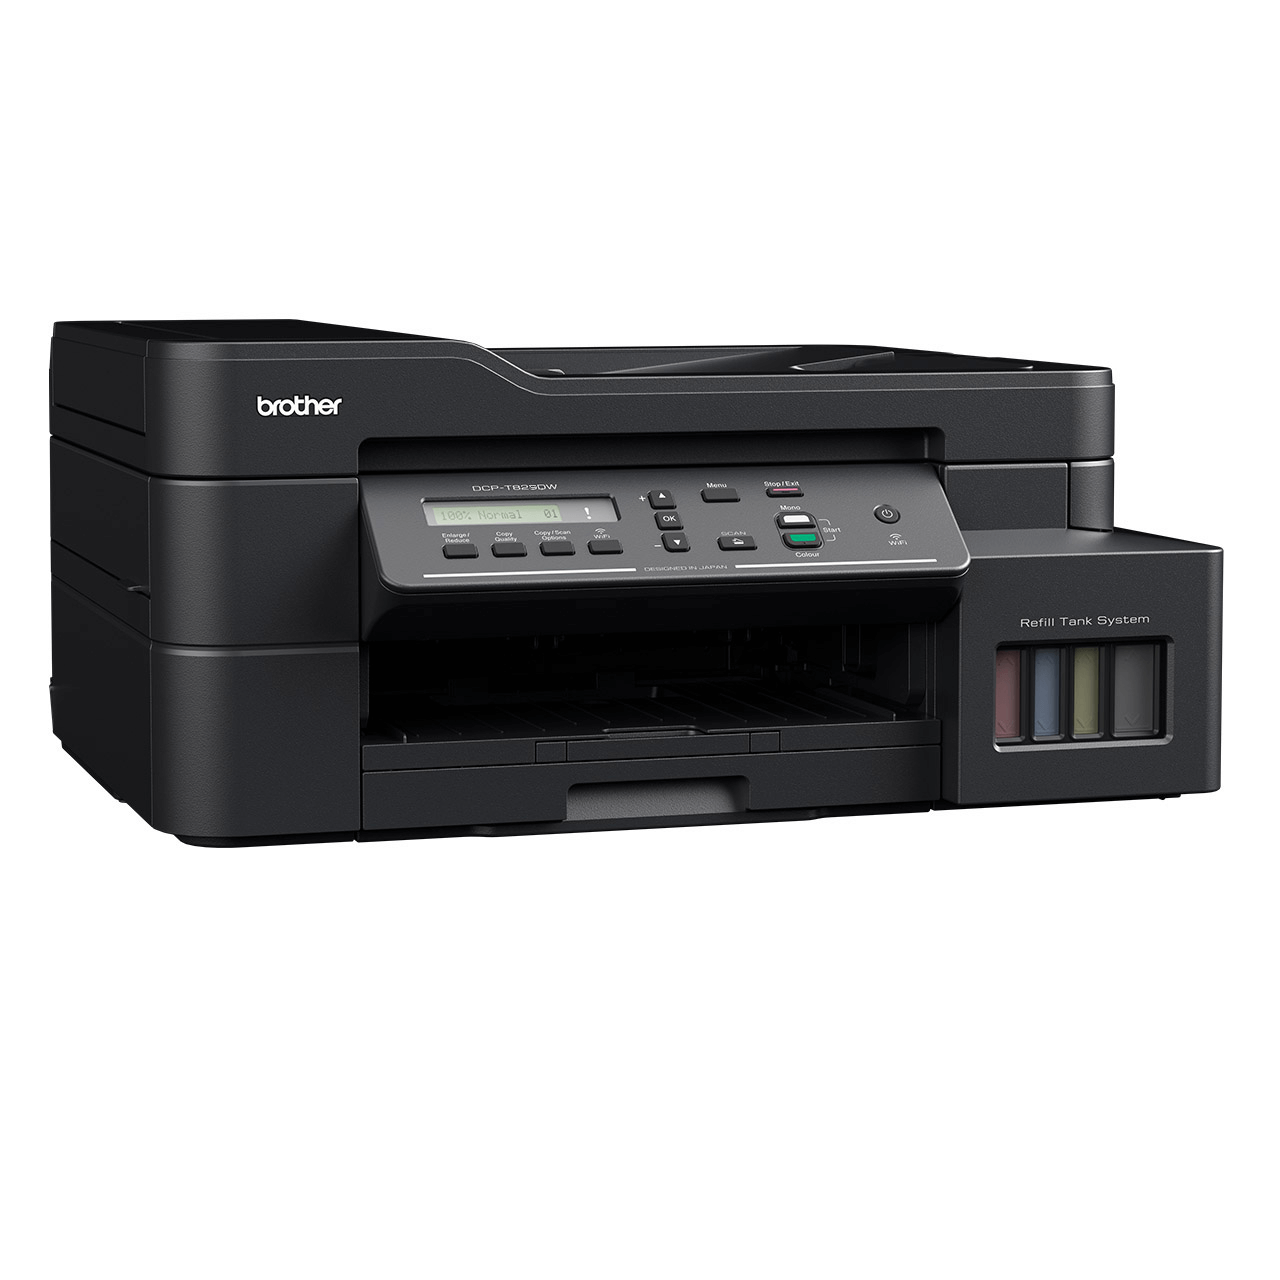 Brother DCP-T825DW